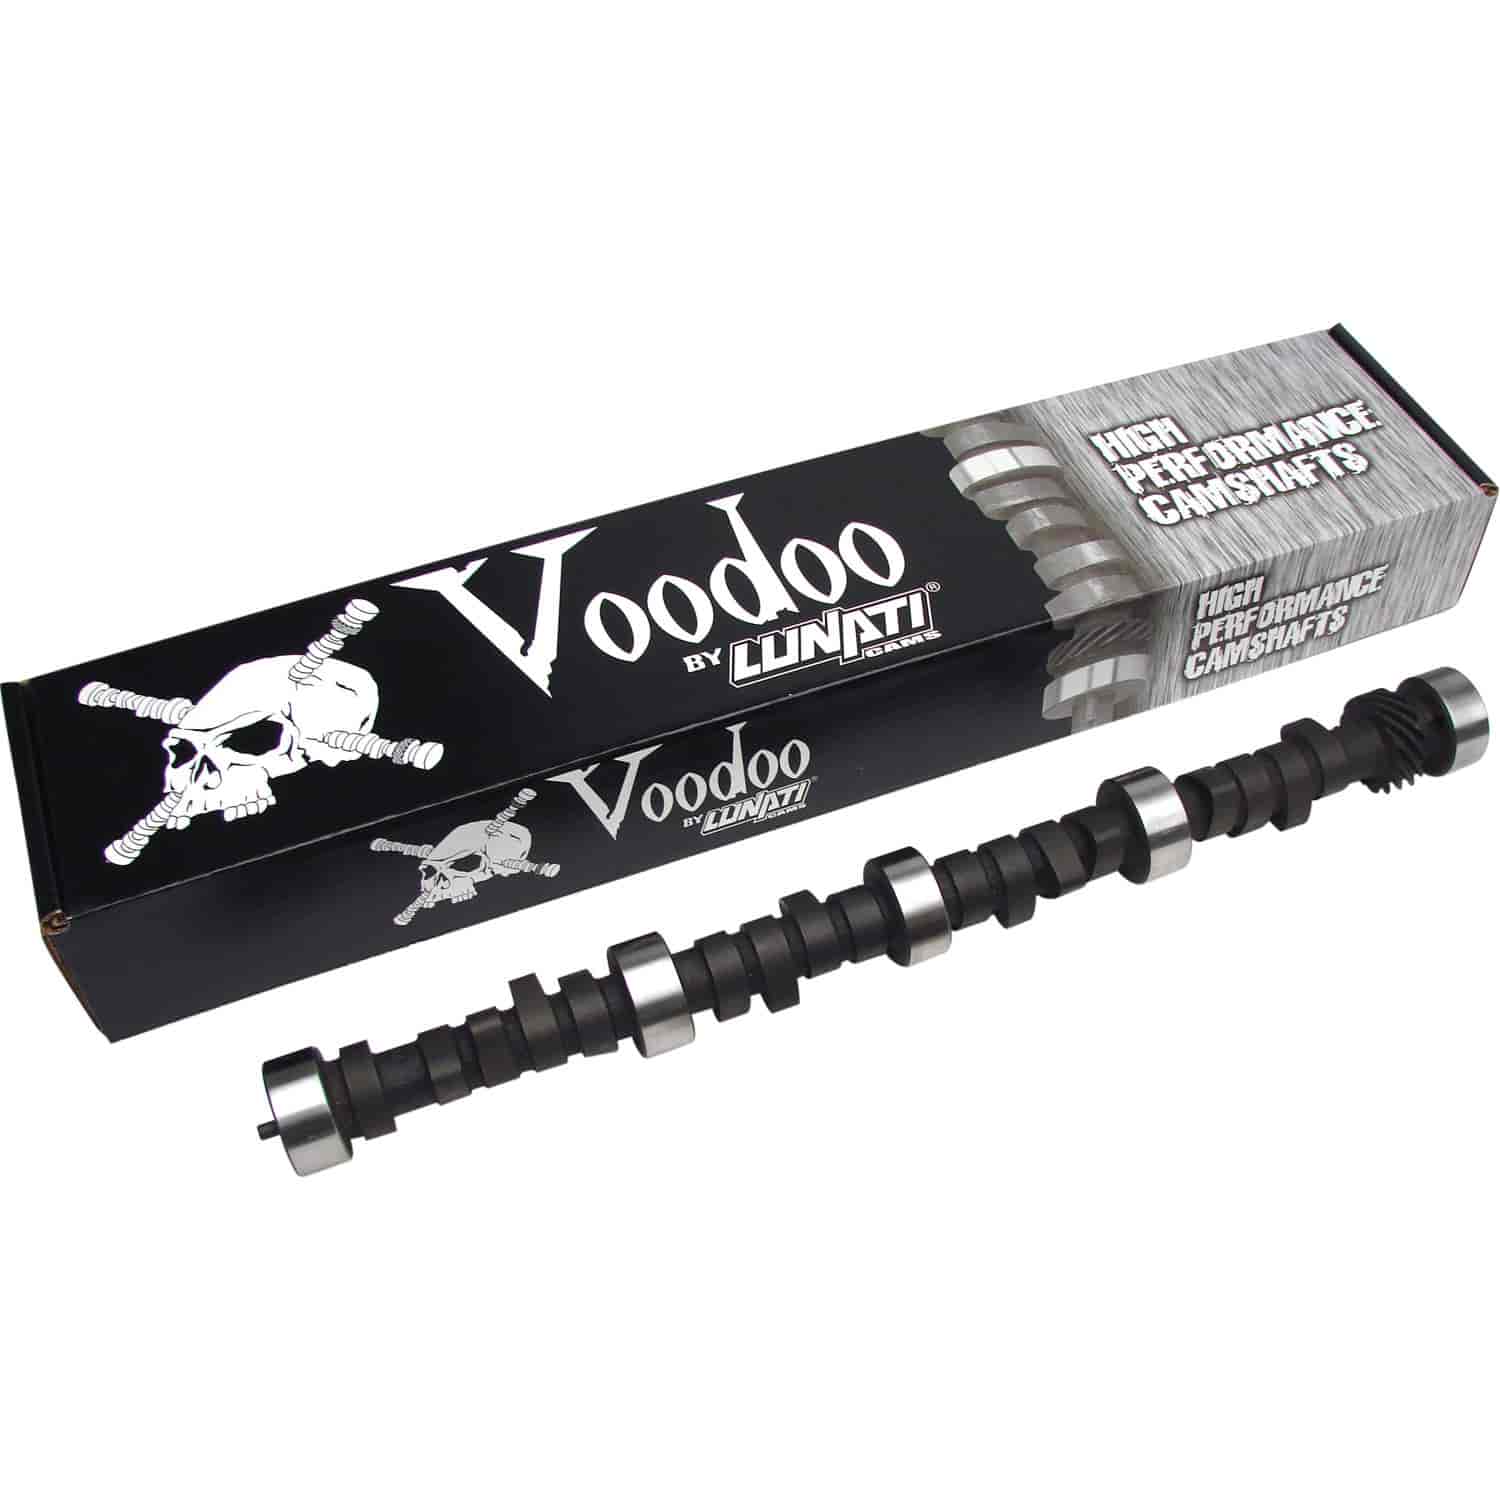 Voodoo Hydraulic Flat Tappet Camshaft Ford 352-428 Lift: .564" /.583"